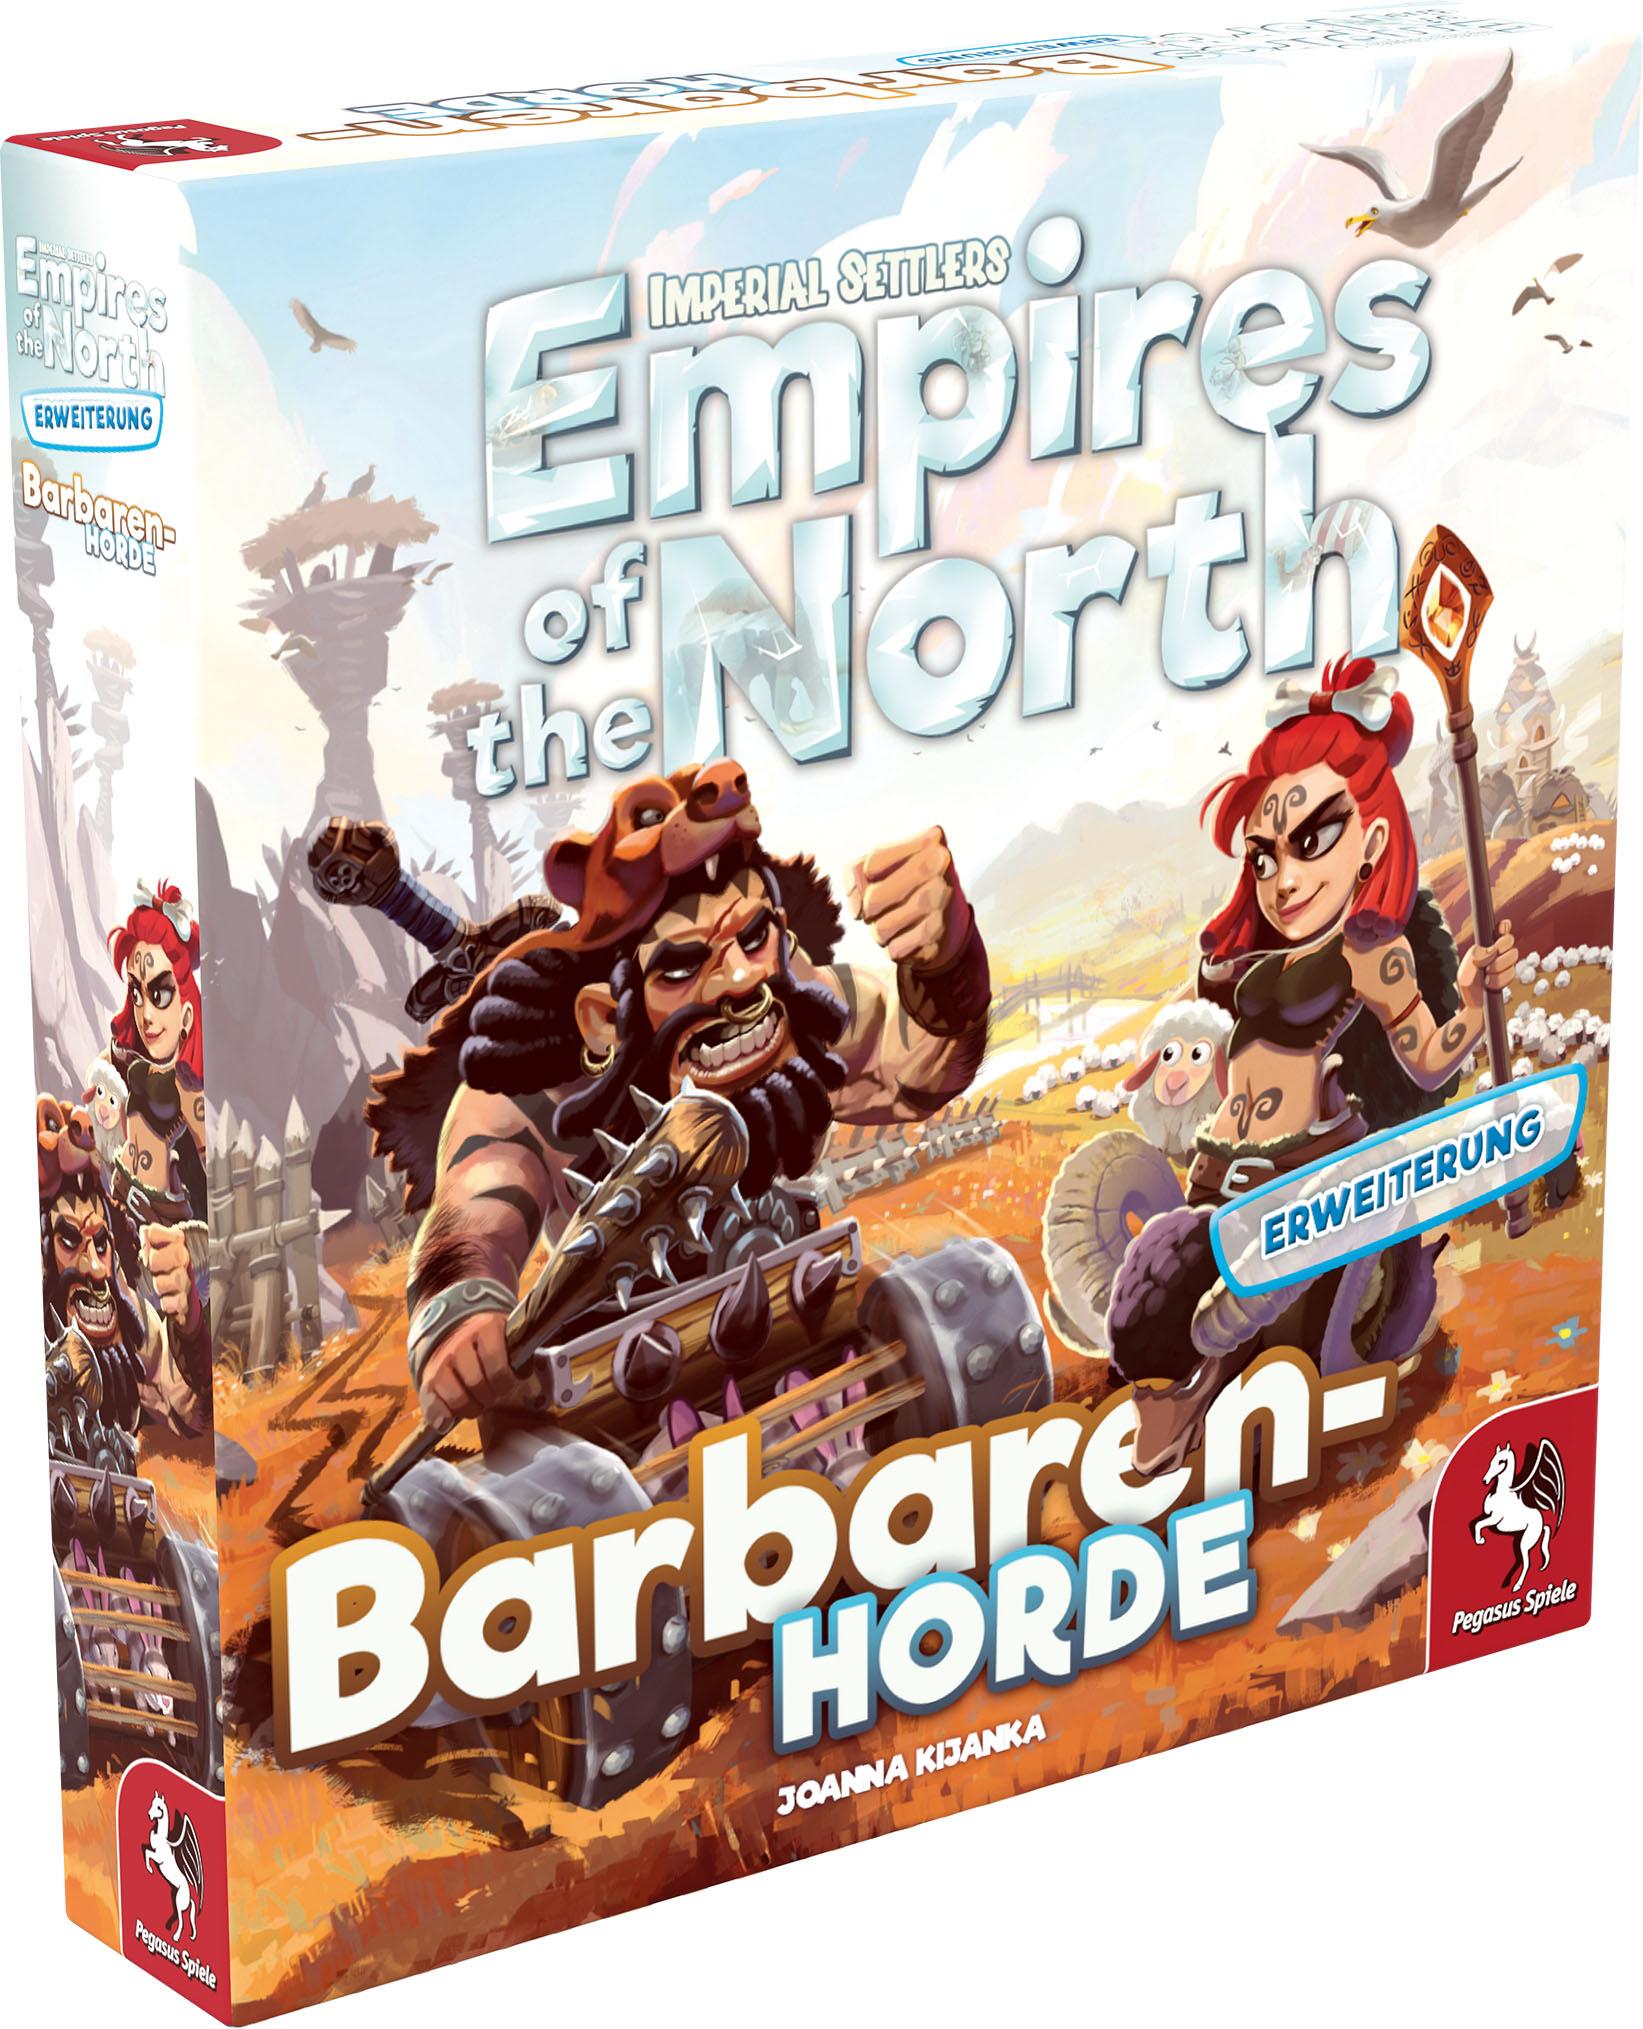 Imperial Settlers - Empires of the North - Erweiterung: Barbaren-Horde